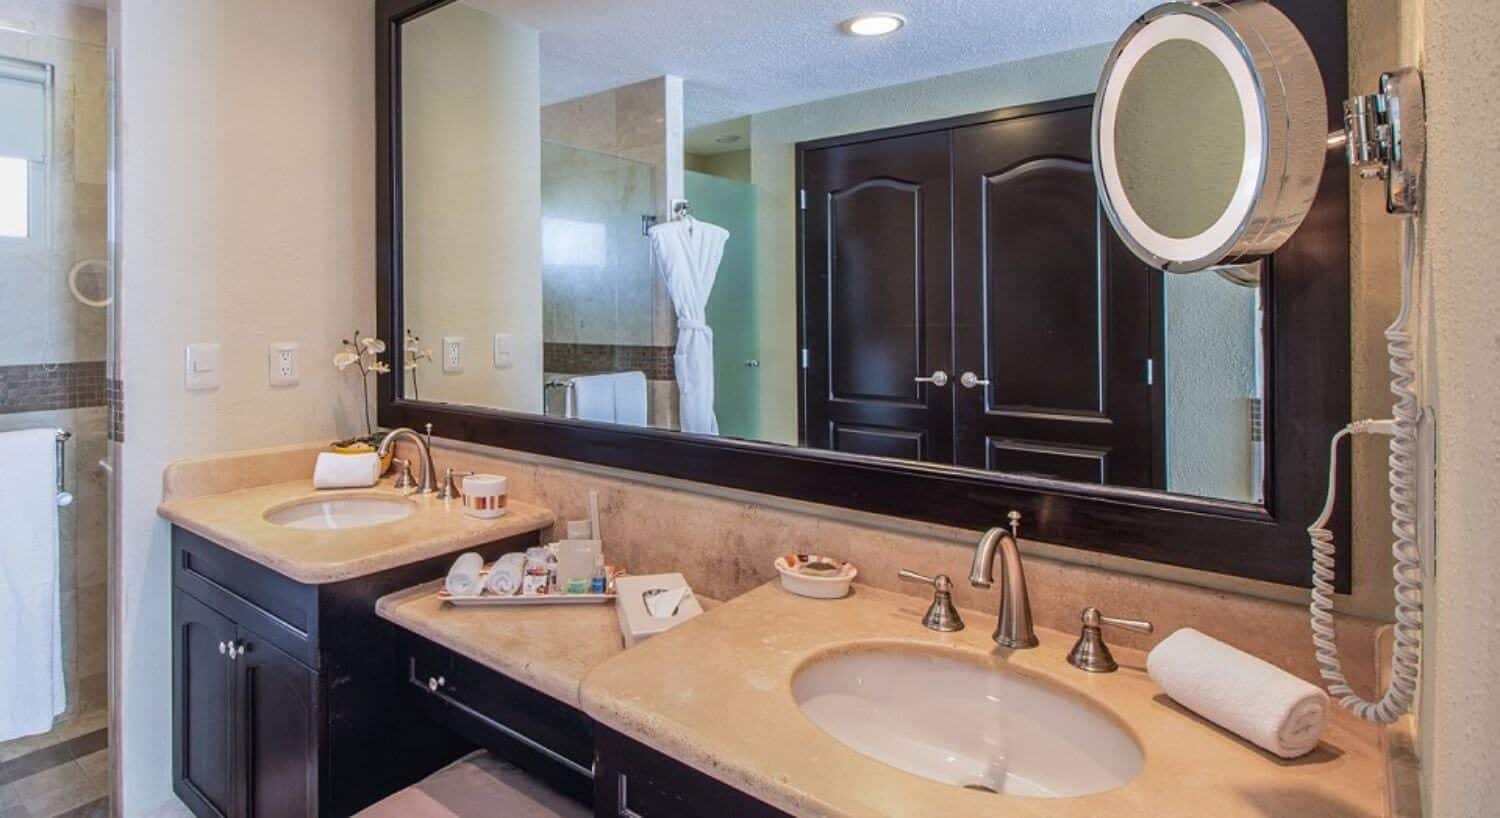 A bathroom with double sinks with a vanity with ottoman in between them, dark brown cupboards, granite countertops, and mirror the width of the sinks and vanity, and a walk in shower.